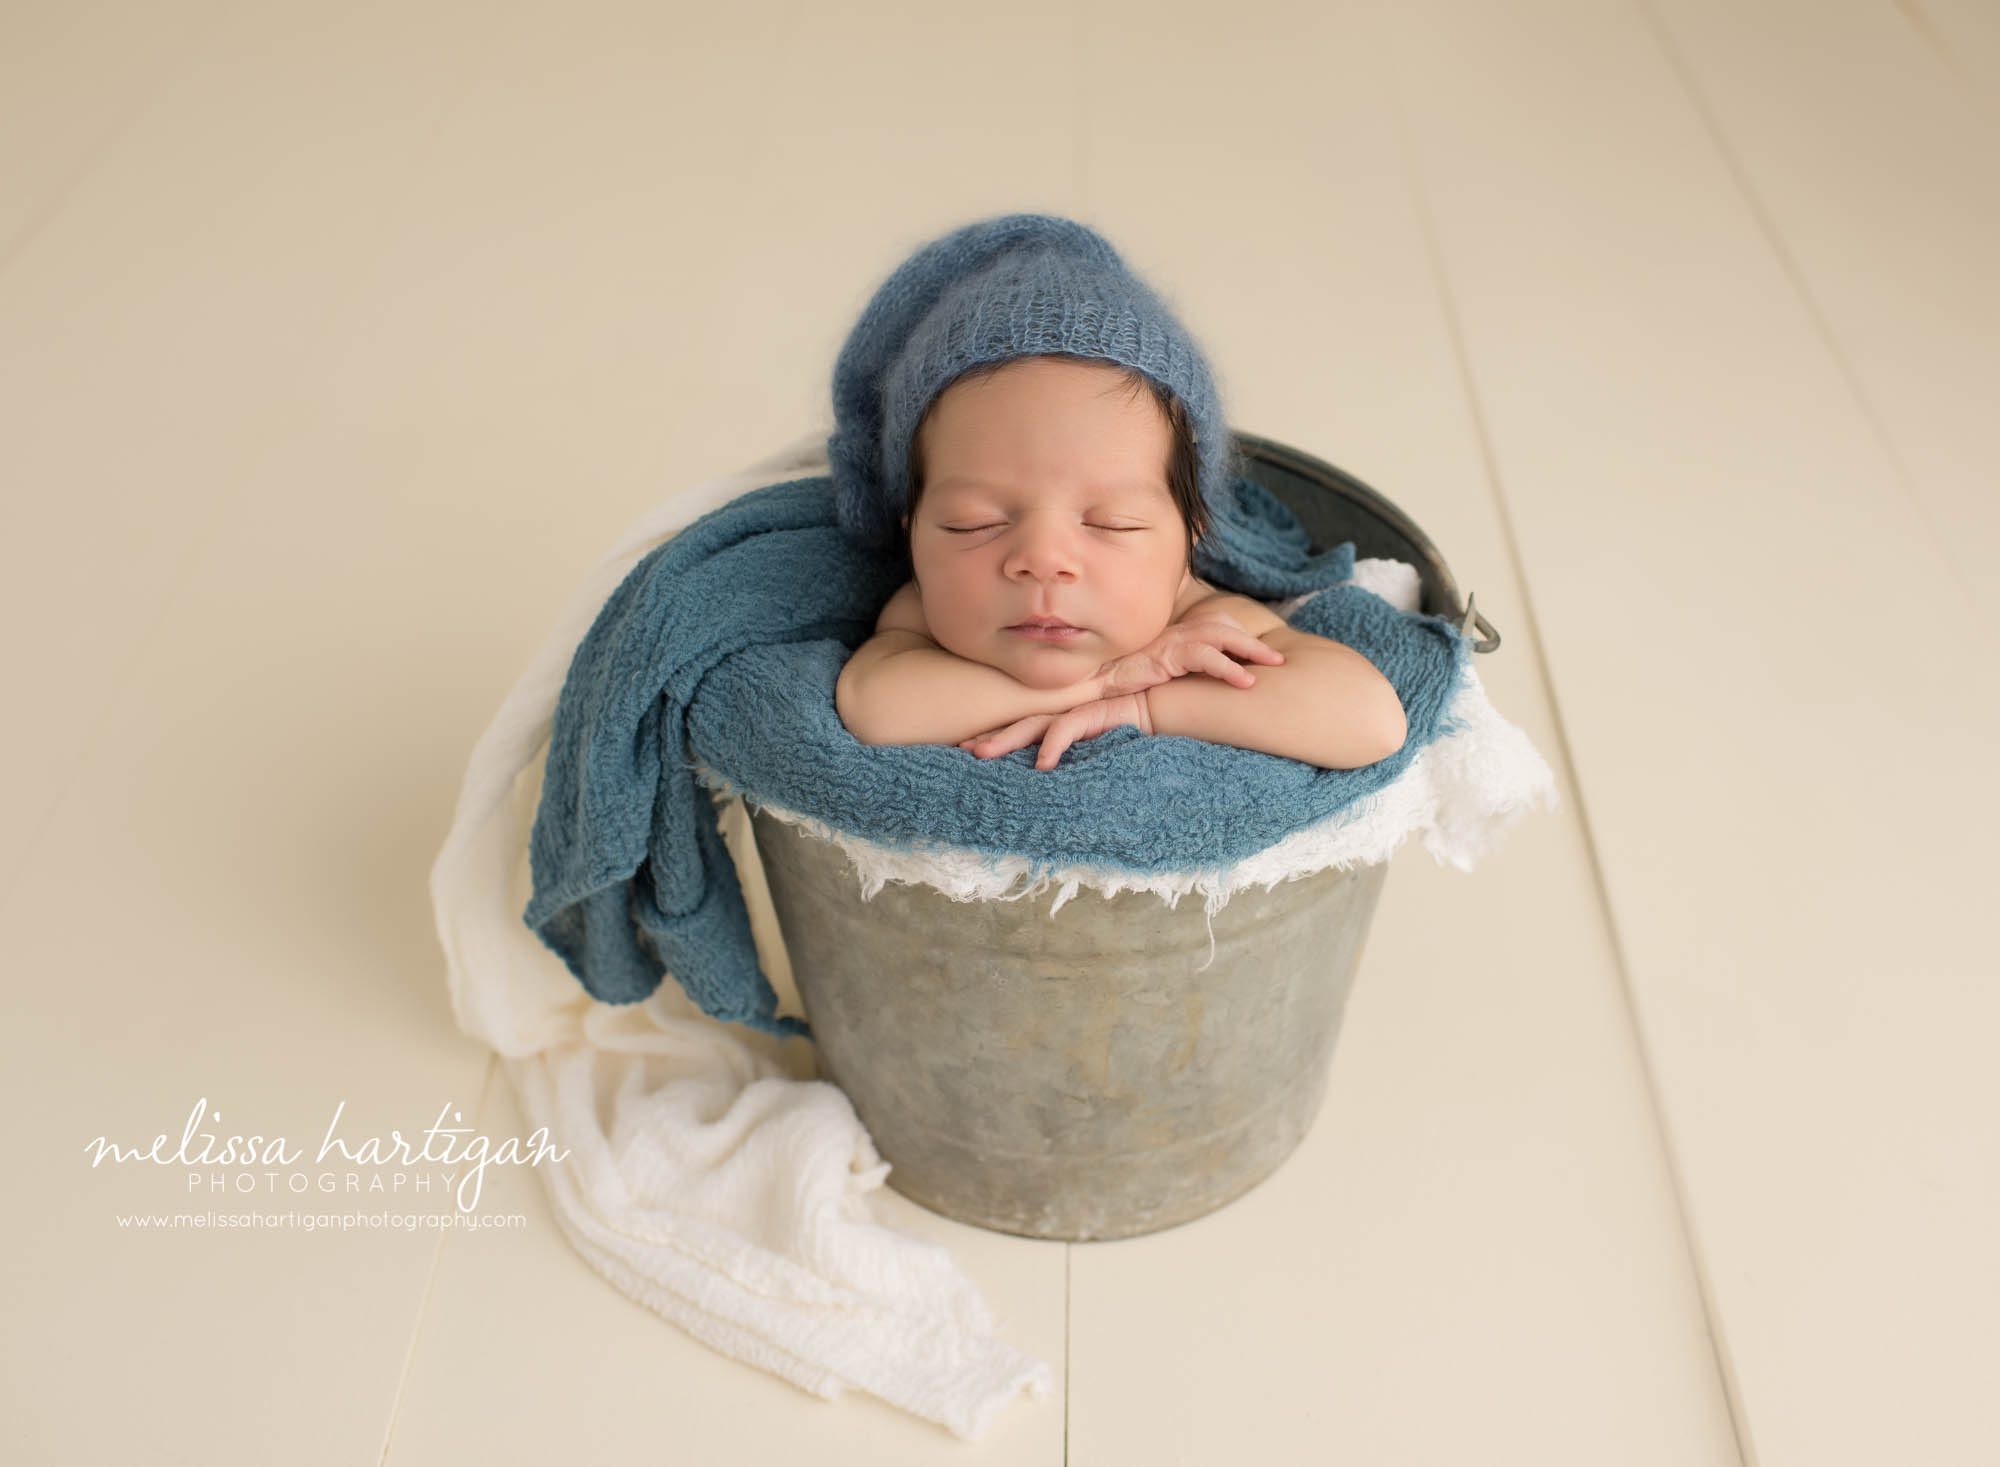 Melissa Hartigan Photography CT Newborn Photographer East Hartford baby boy sleeping in metal bucket with blue knit blanket and knit hat